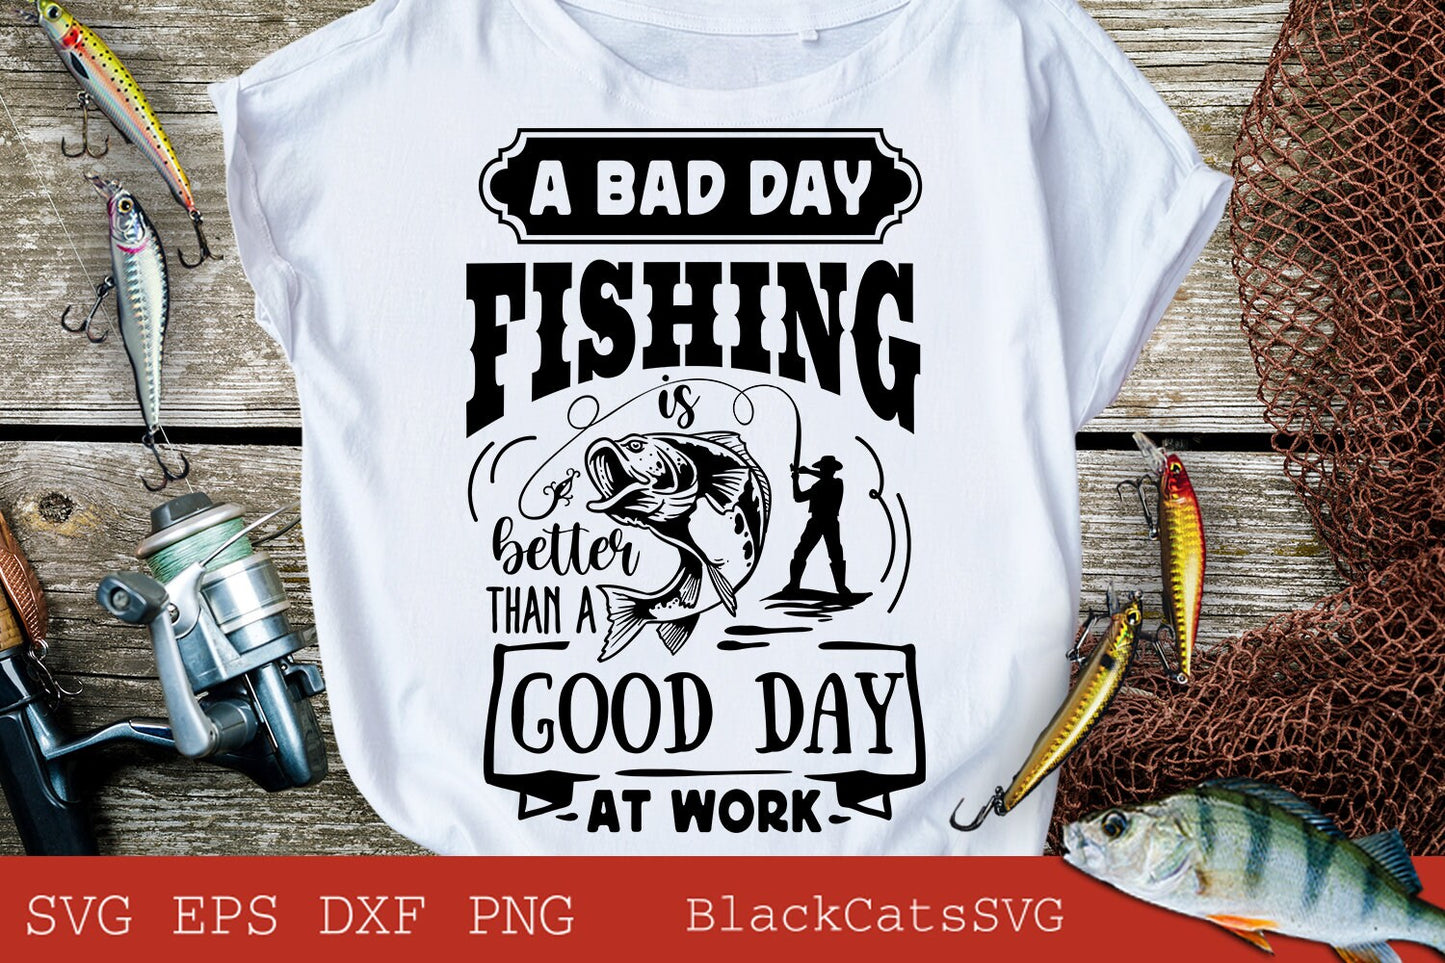 A bad day fishing is better than a good day at work svg, Fishing poster svg, Fish svg, Fishing Svg,  Fishing Shirt, Fathers Day Svg